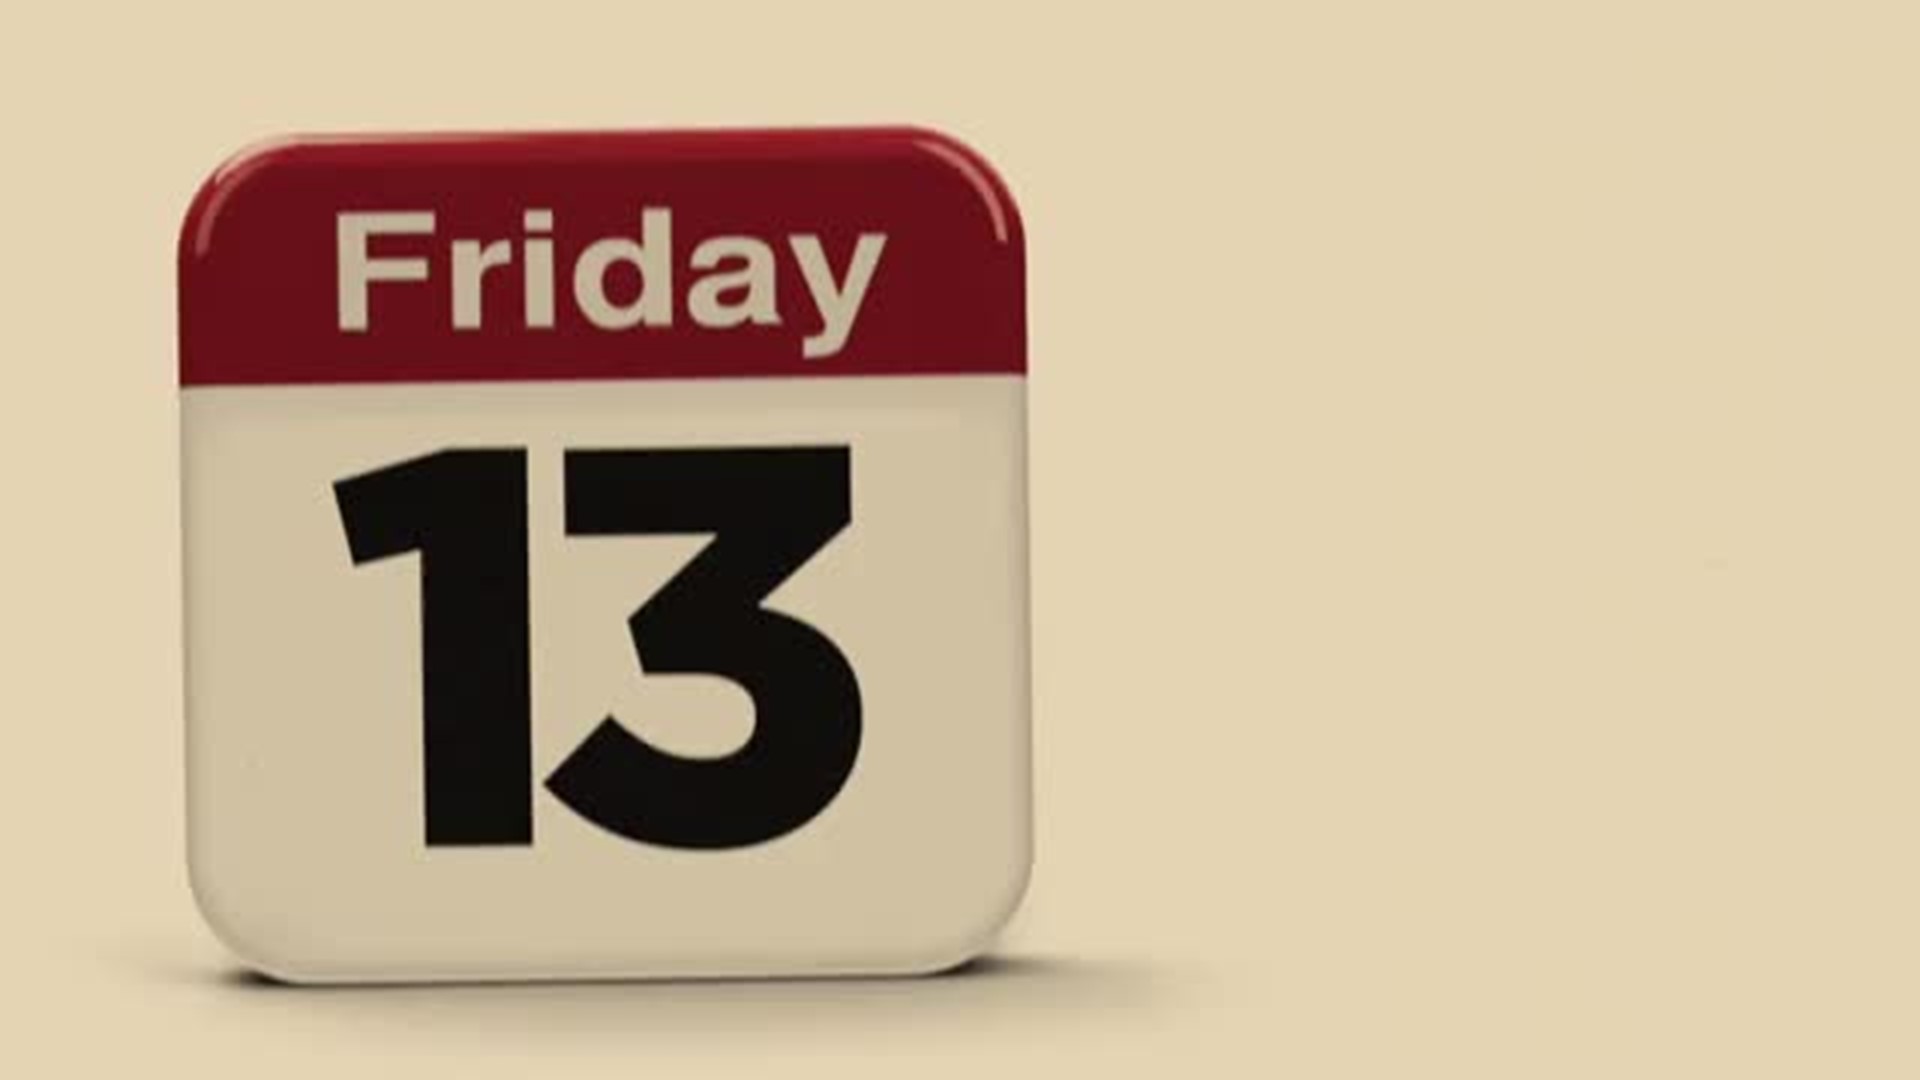 Facts about Friday the 13th